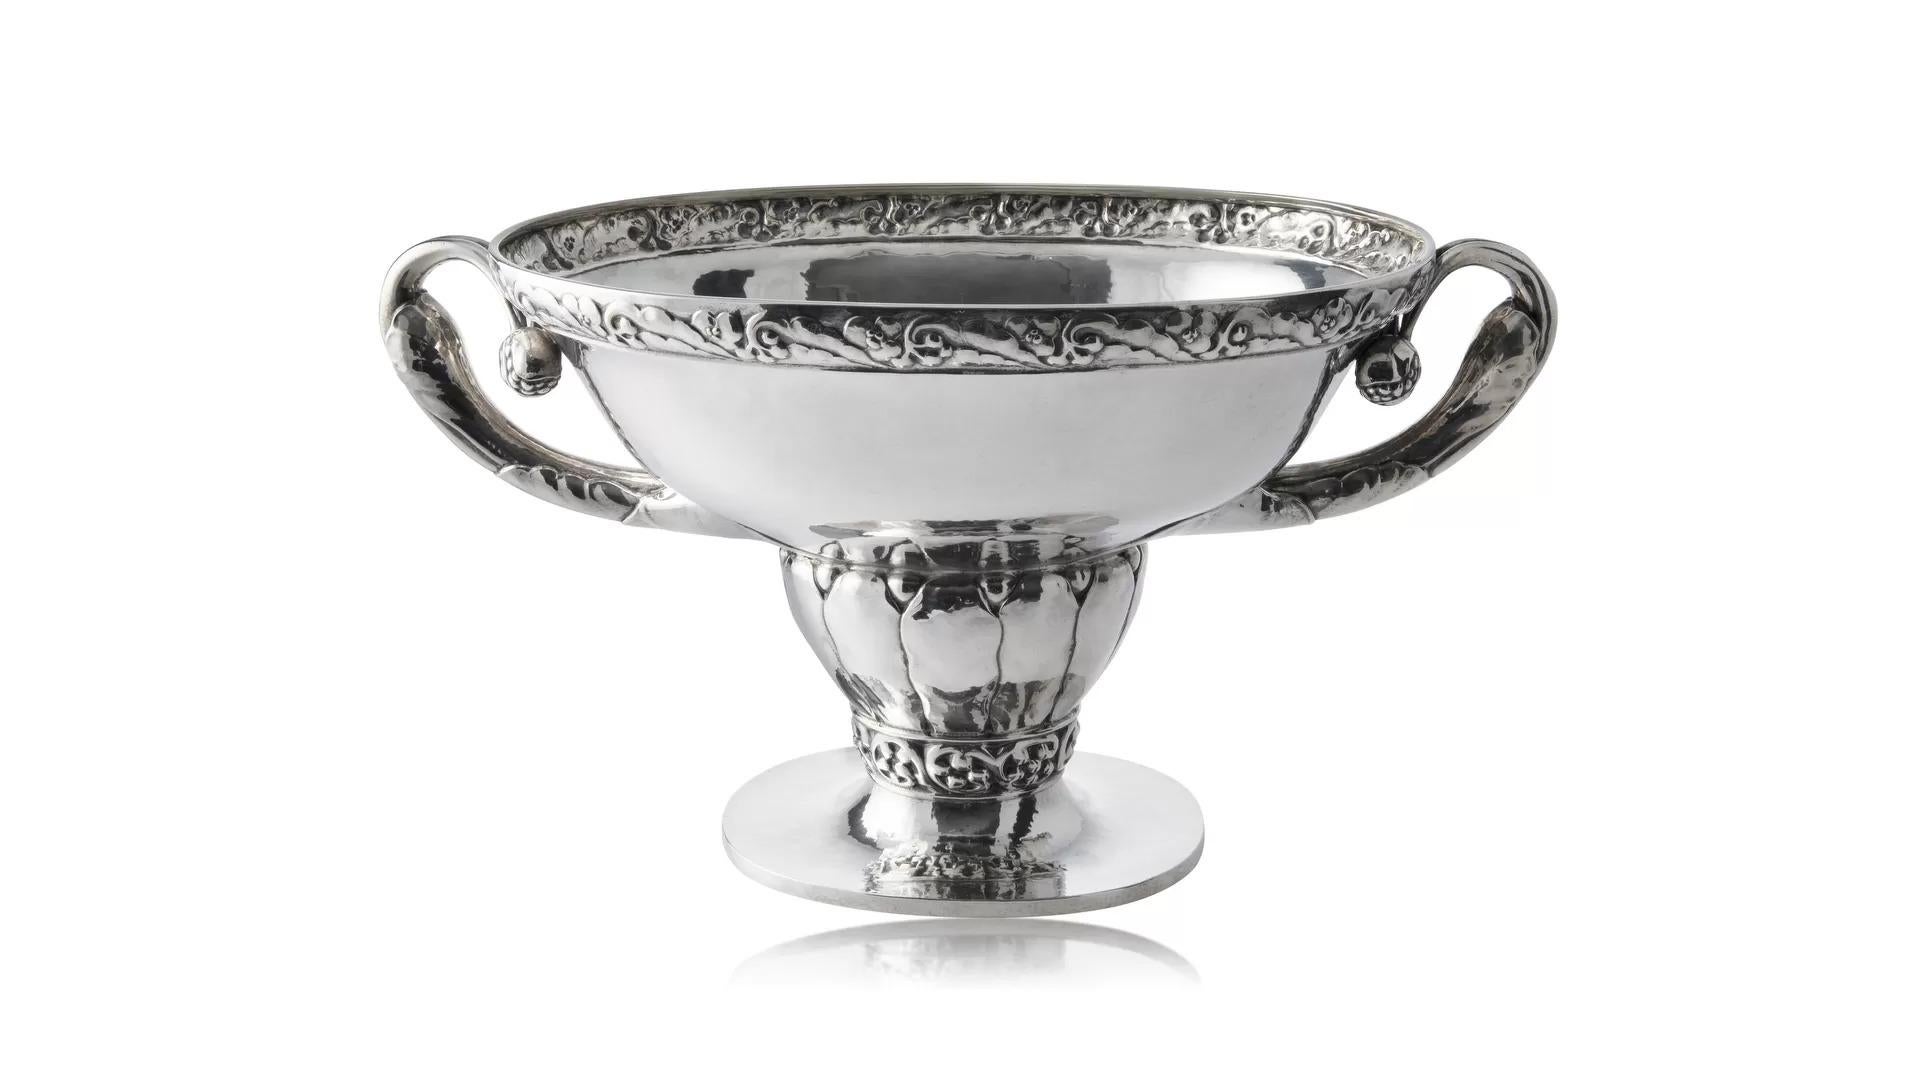 A Georg Jensen large silver Jardinière #165 designed by Georg Jensen in 1916. An early and rare item, one of the very first pieces produced in this design.  The jardinière features a large oval basin adorned with intricate floral borders, showcasing